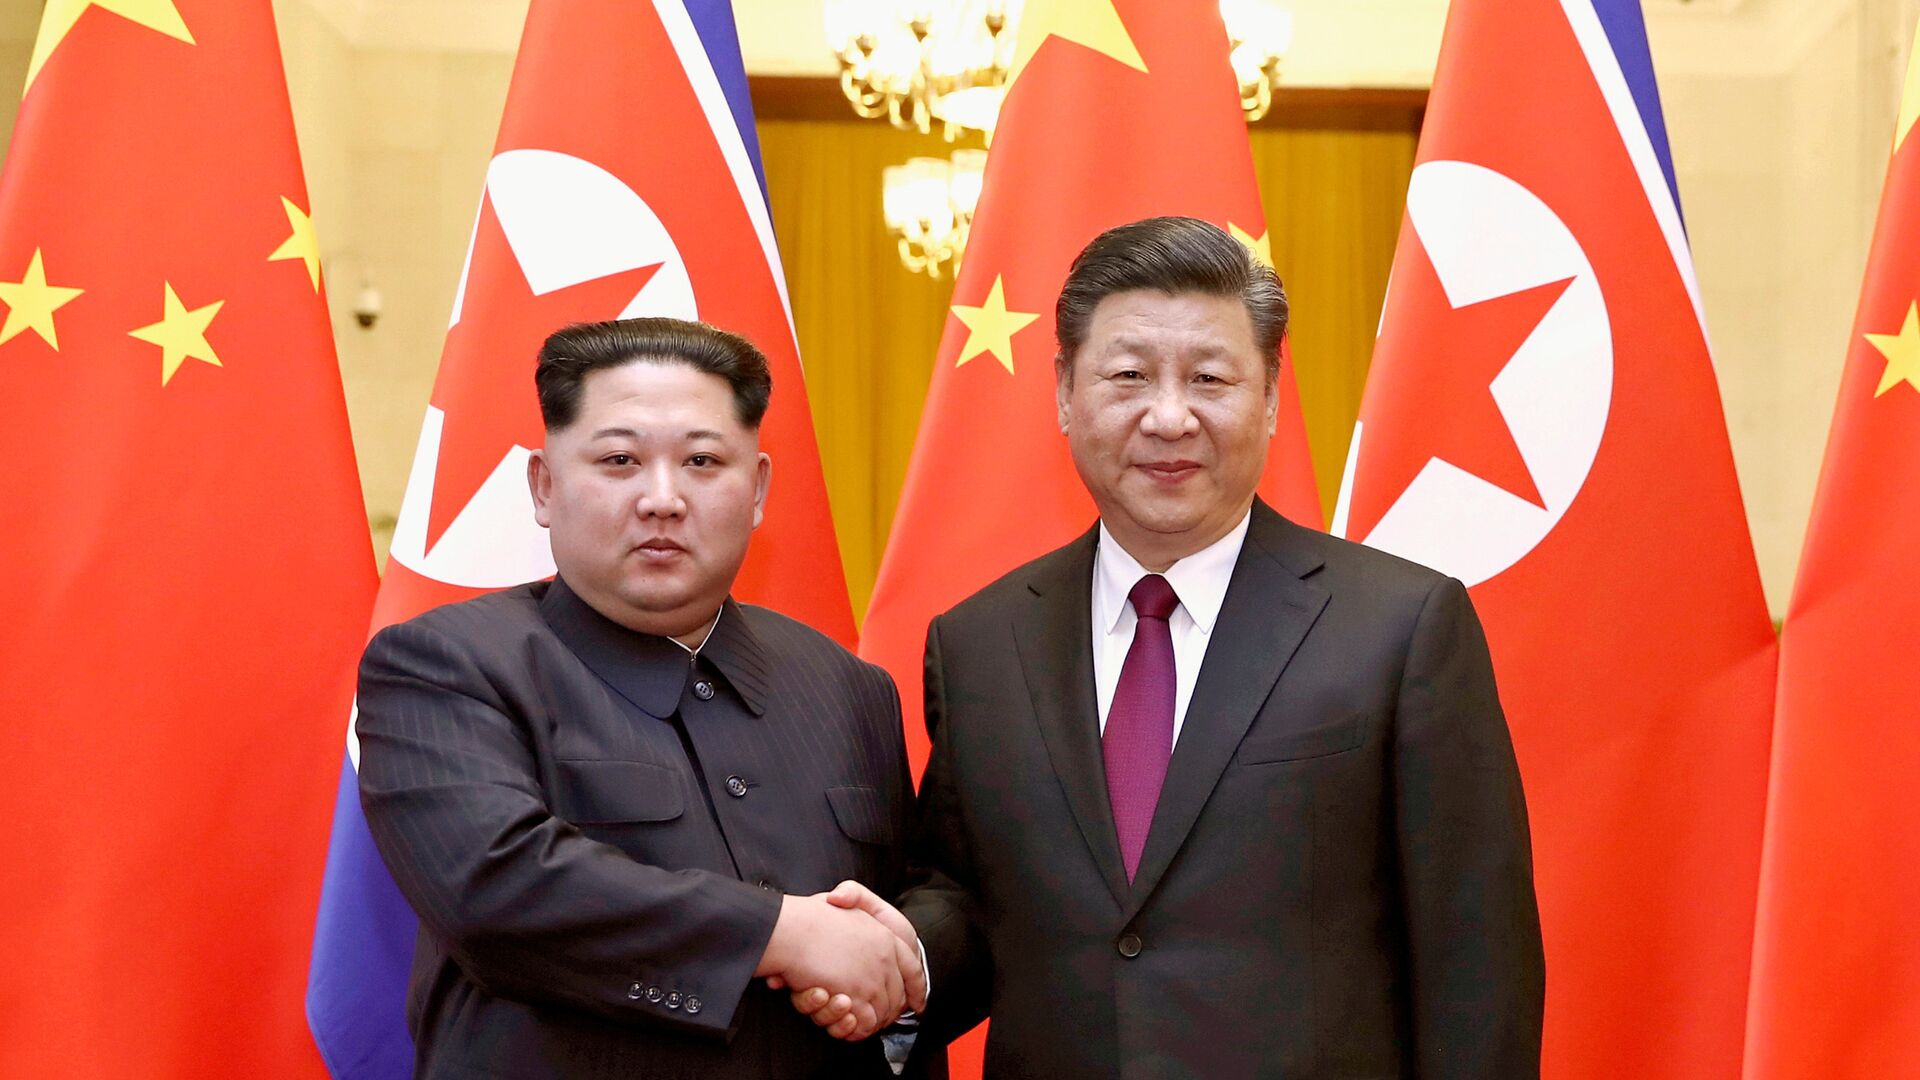 Kim Jong-un expressed hope for improving cooperation with China